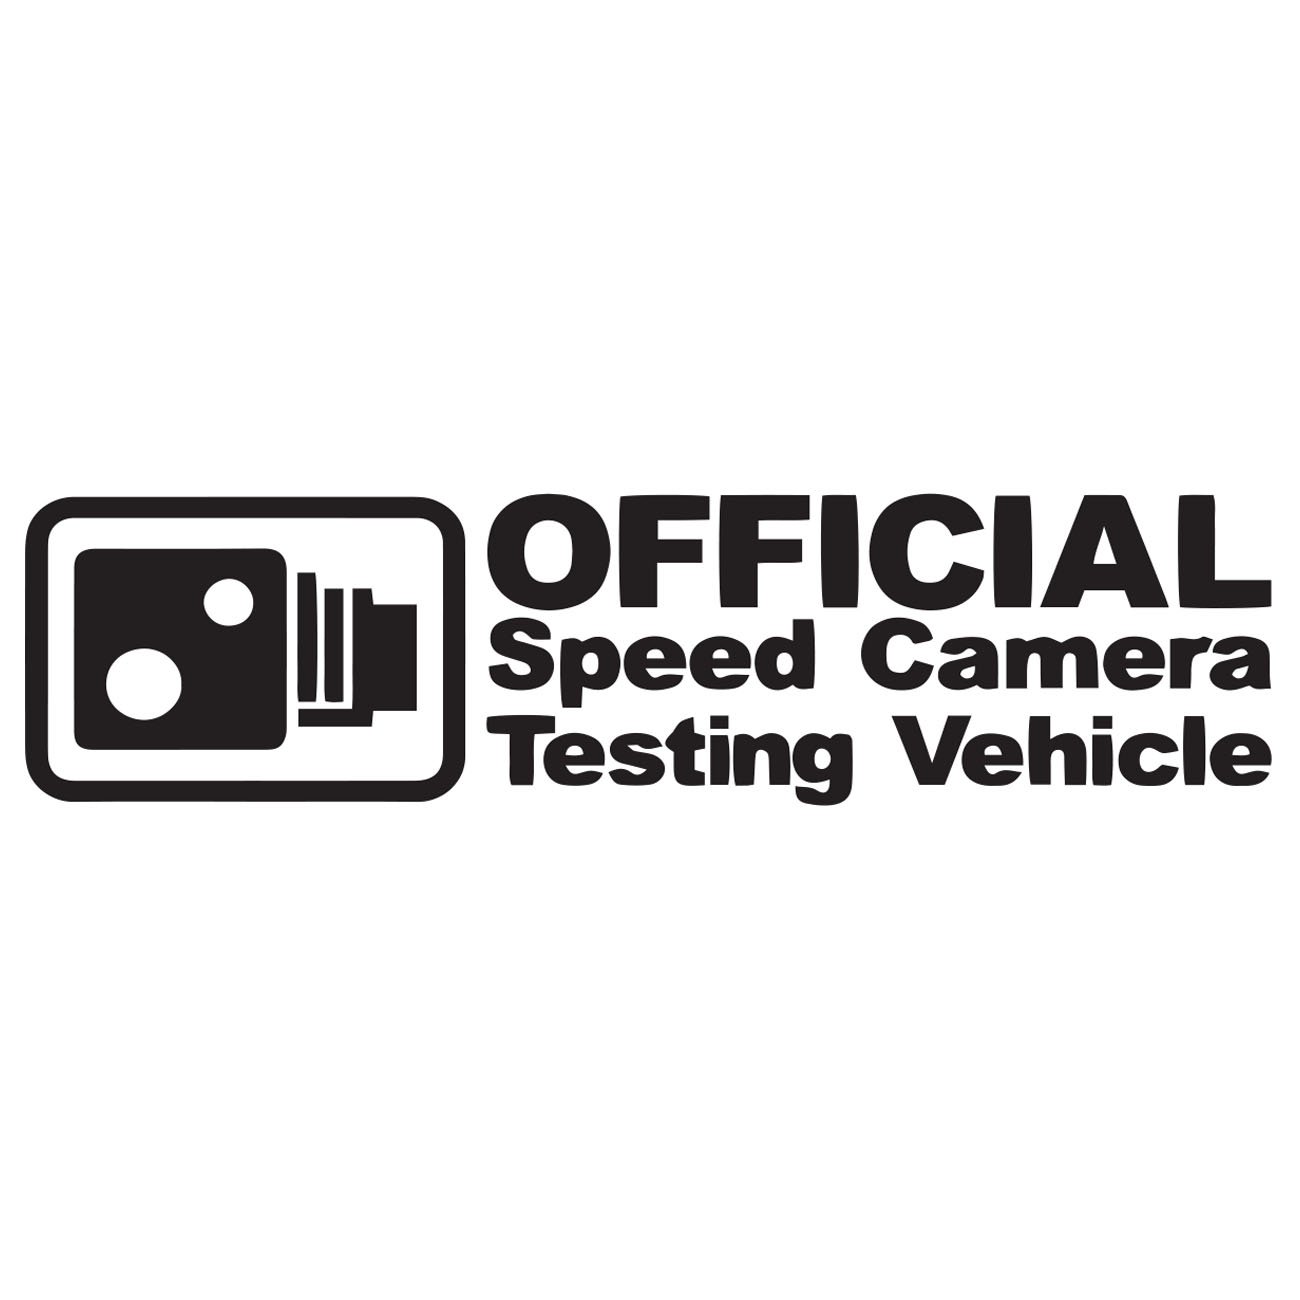 Official speed camera testing vehicle